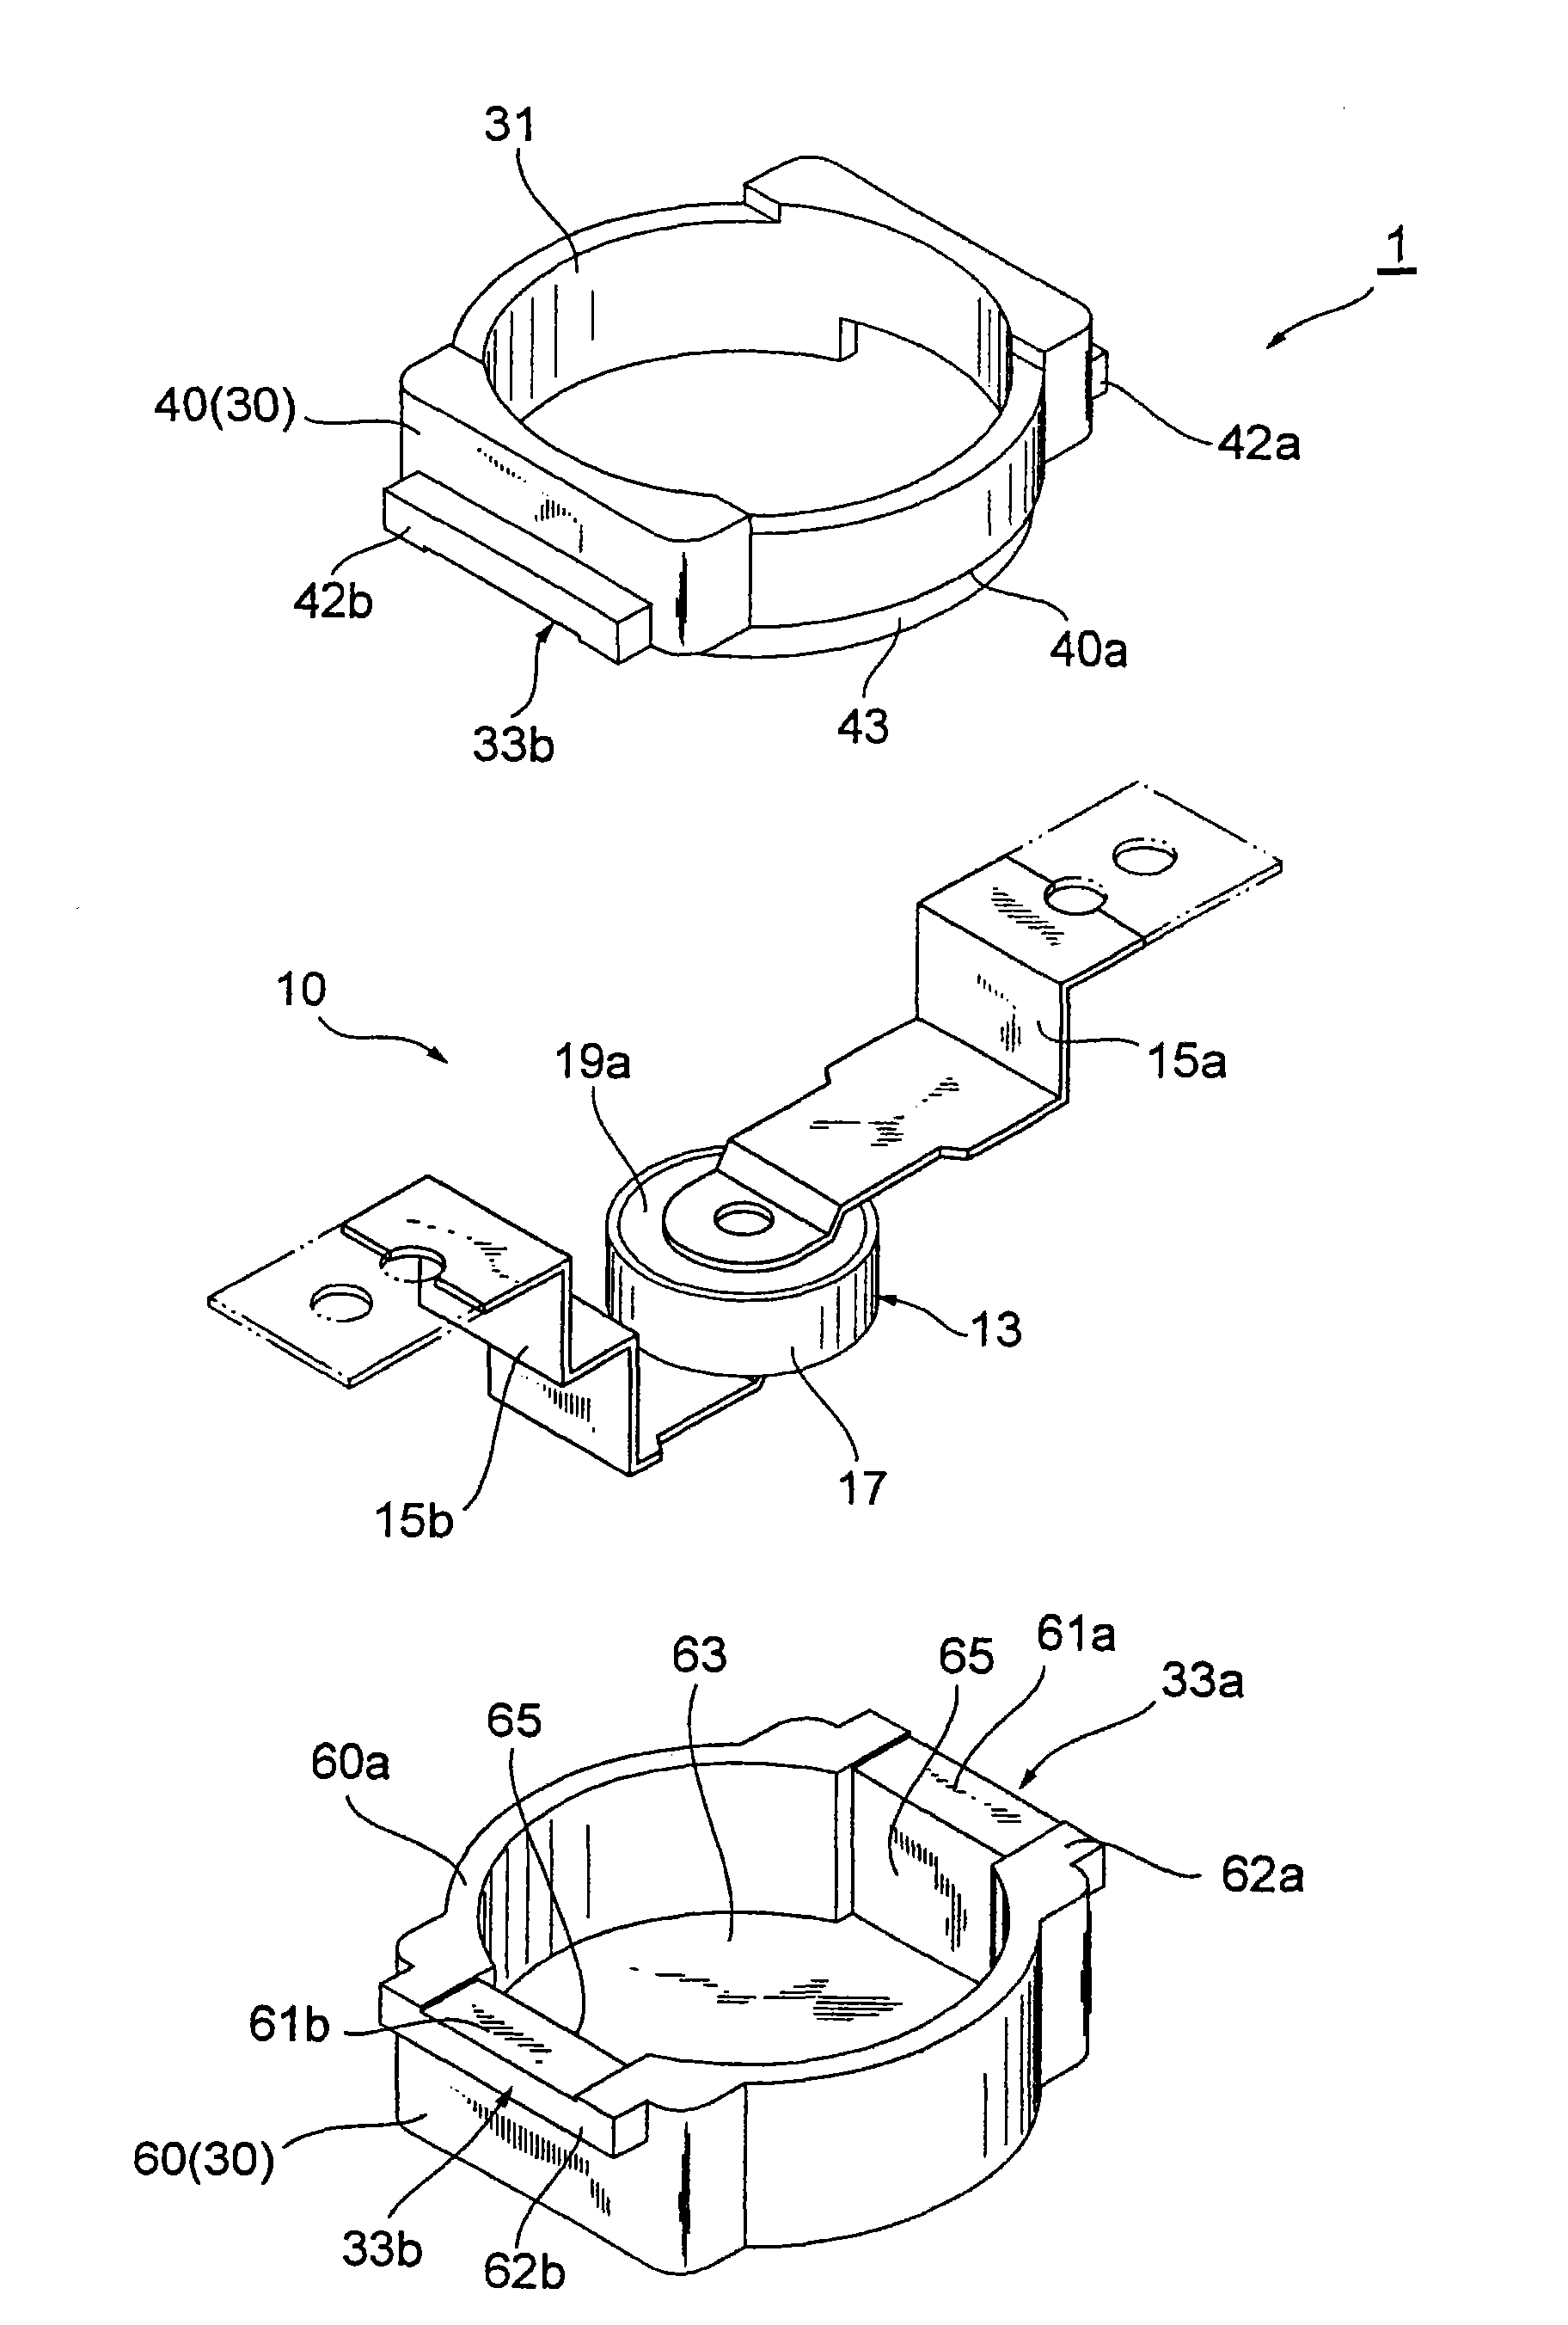 Electronic component unit and method for manufacturing same